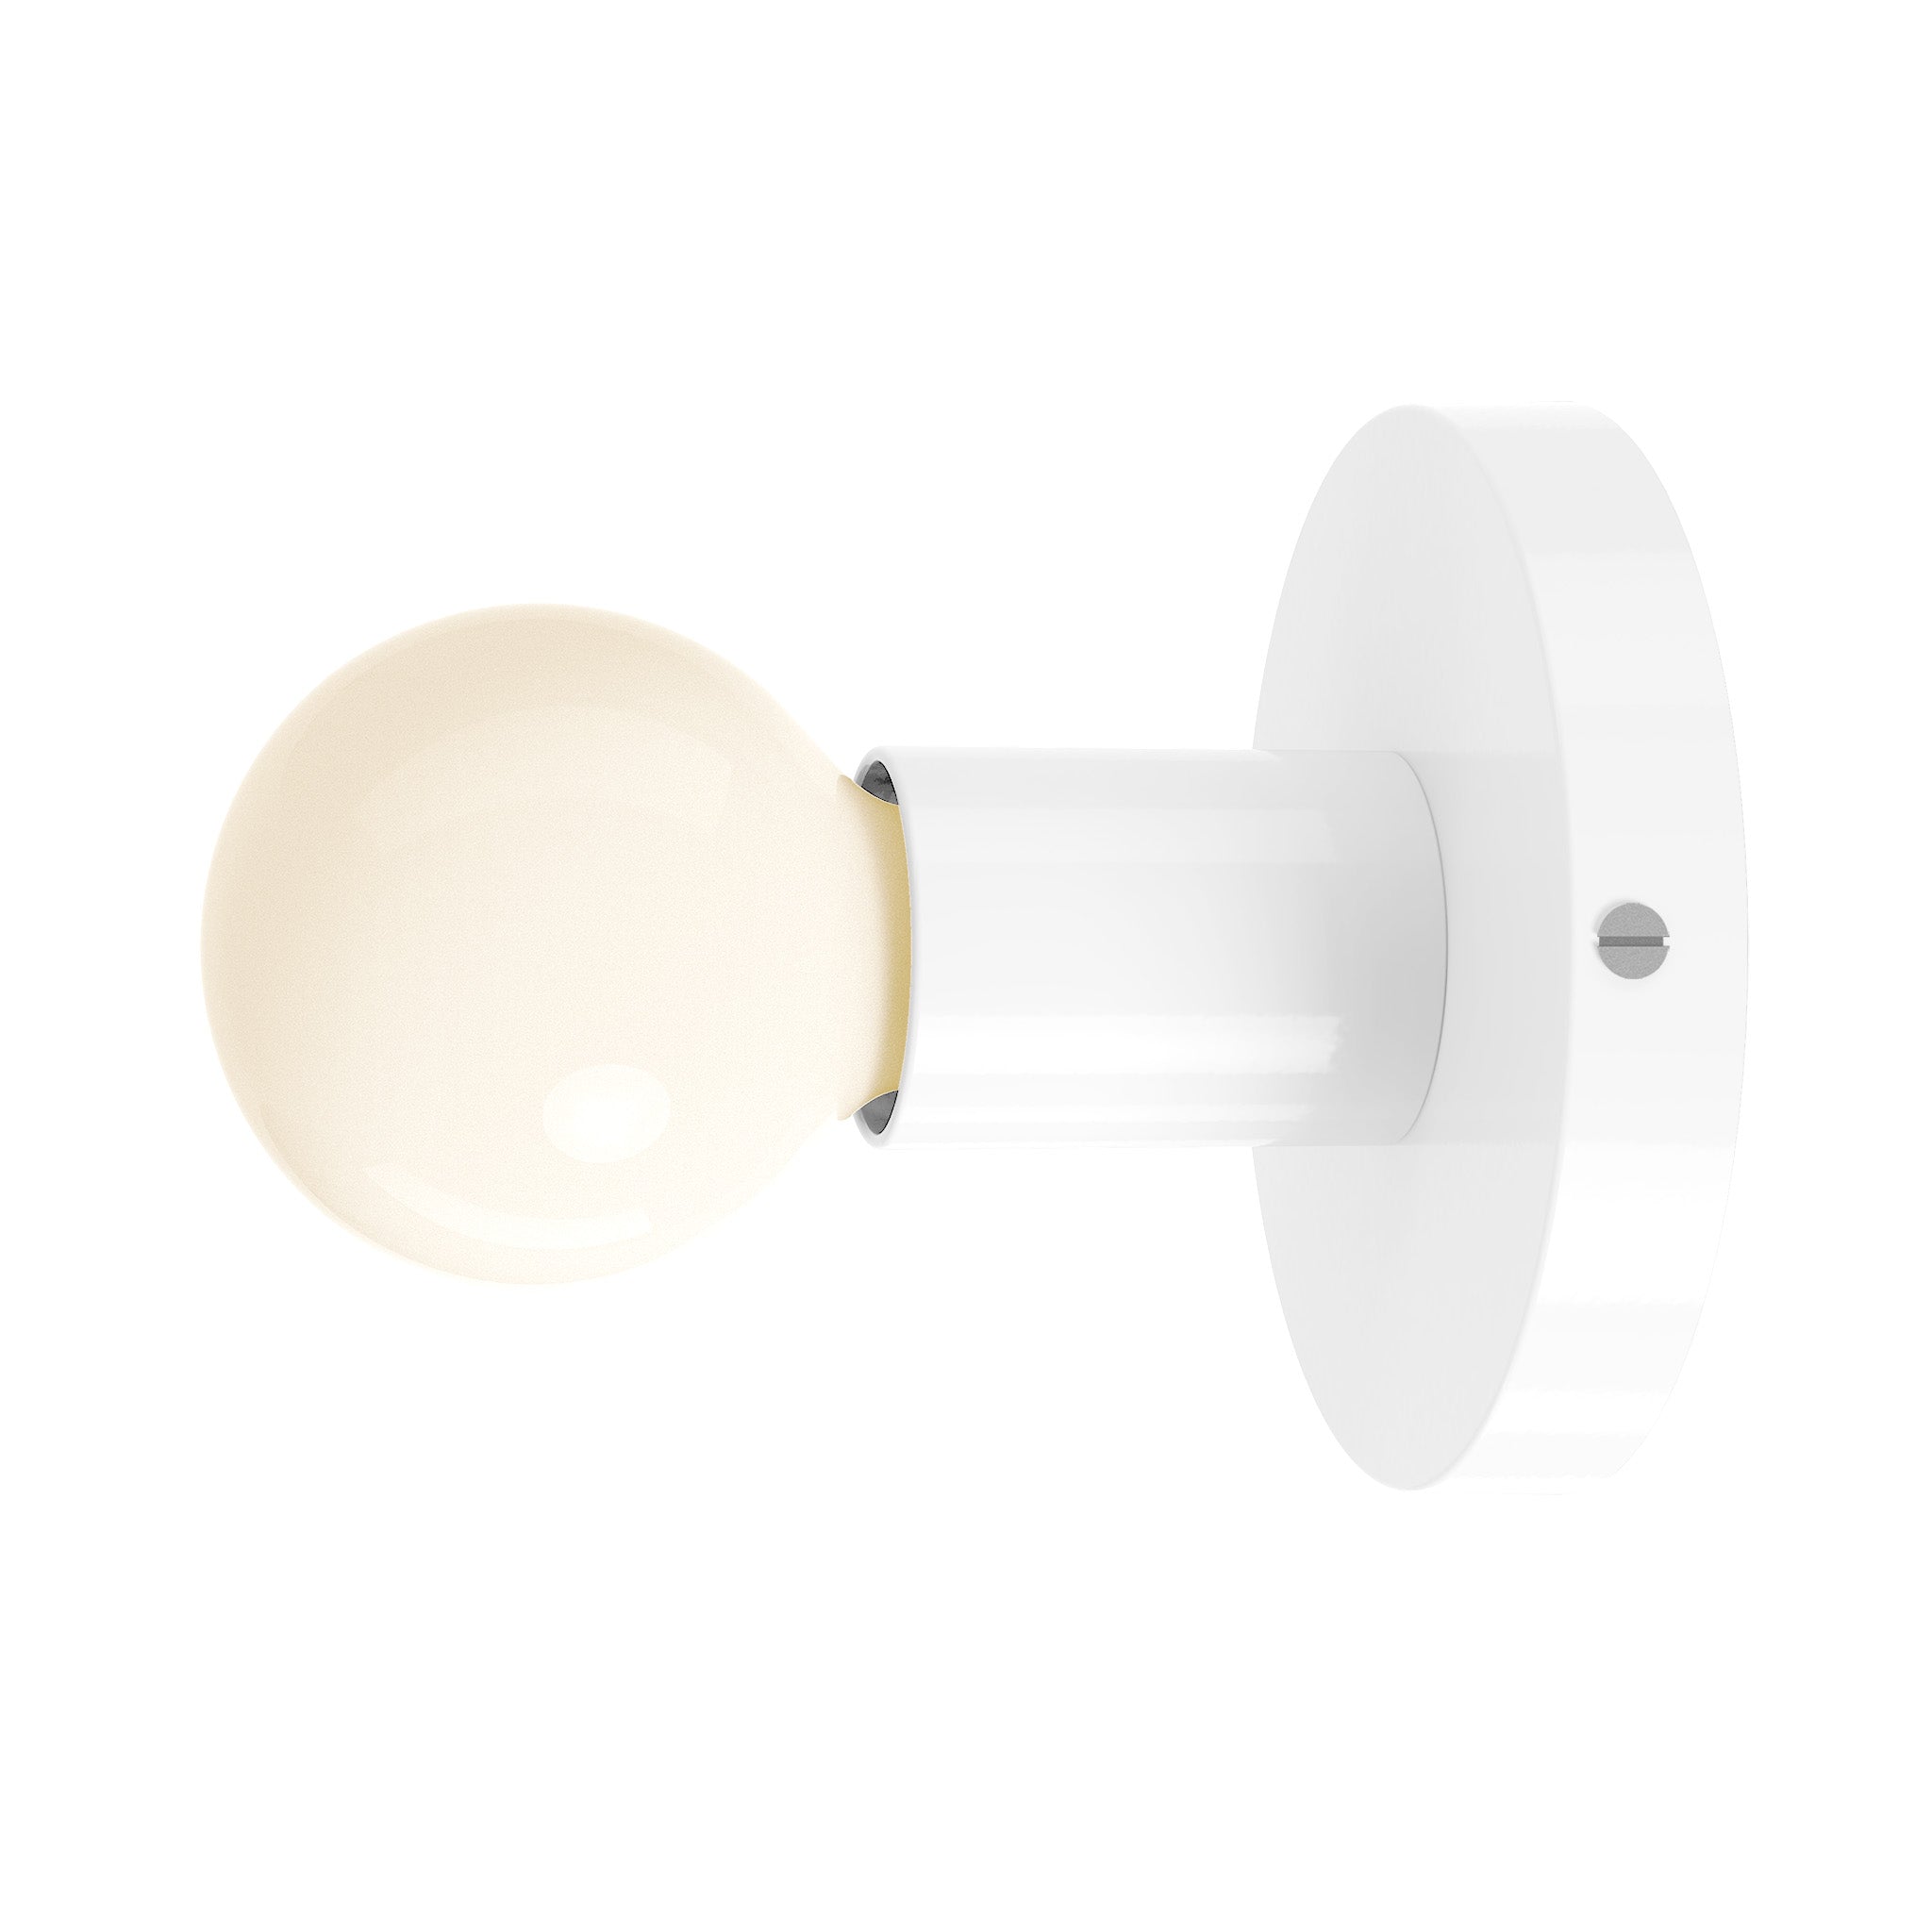 nickel white color twink sconce dutton brown lighting